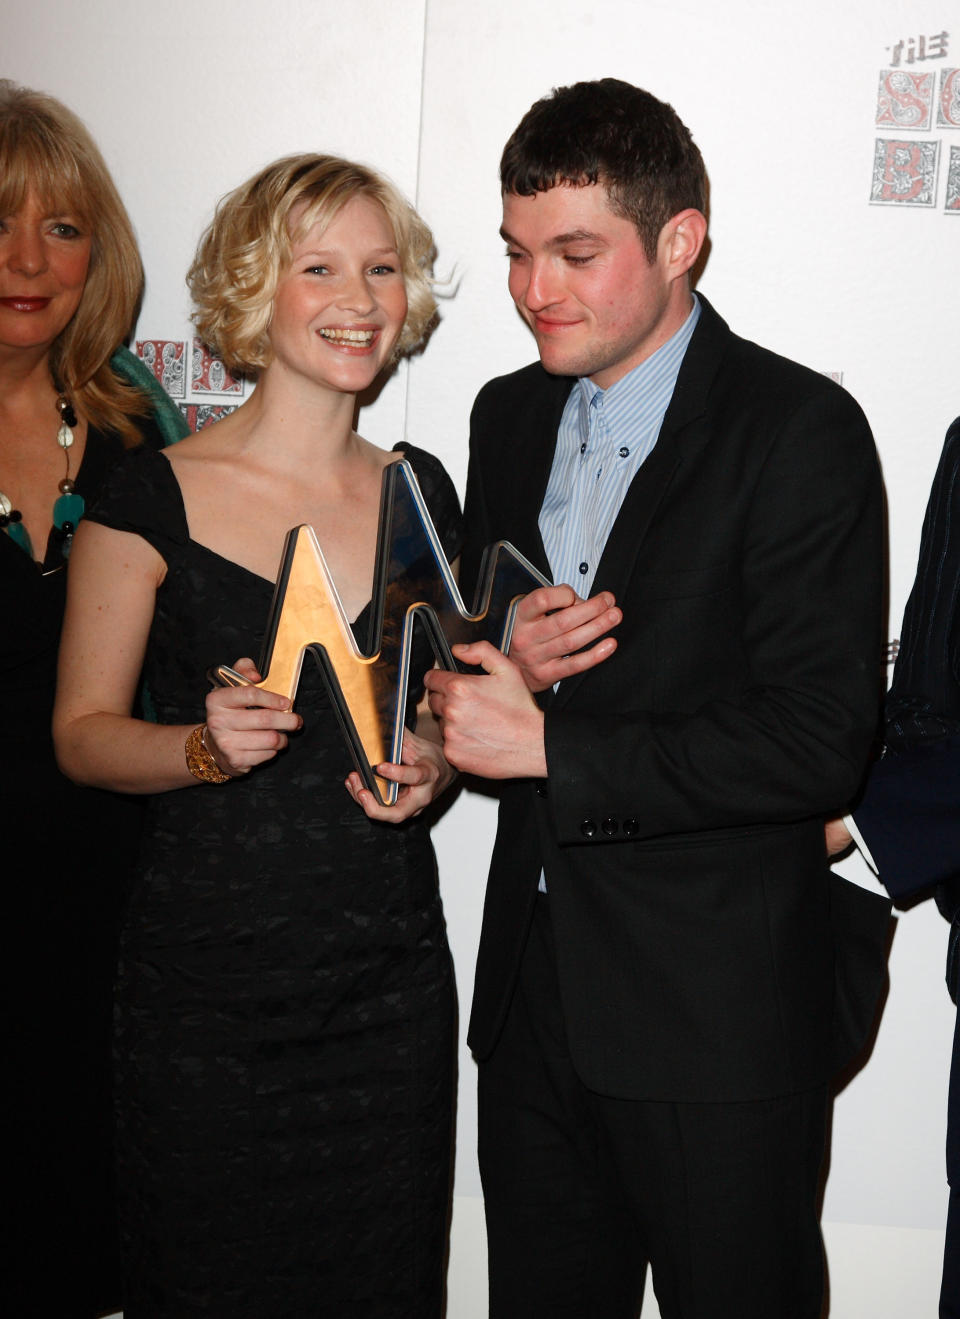 LONDON - JANUARY 29:  Joanna Page and Mathew Horne pose with the award for Comedy for Gavin &amp; Stacey during the South Bank Show Awards 2008 held at The Dorchester on January 29, 2008 in London, England.  (Photo by Mike Marsland/WireImage) 